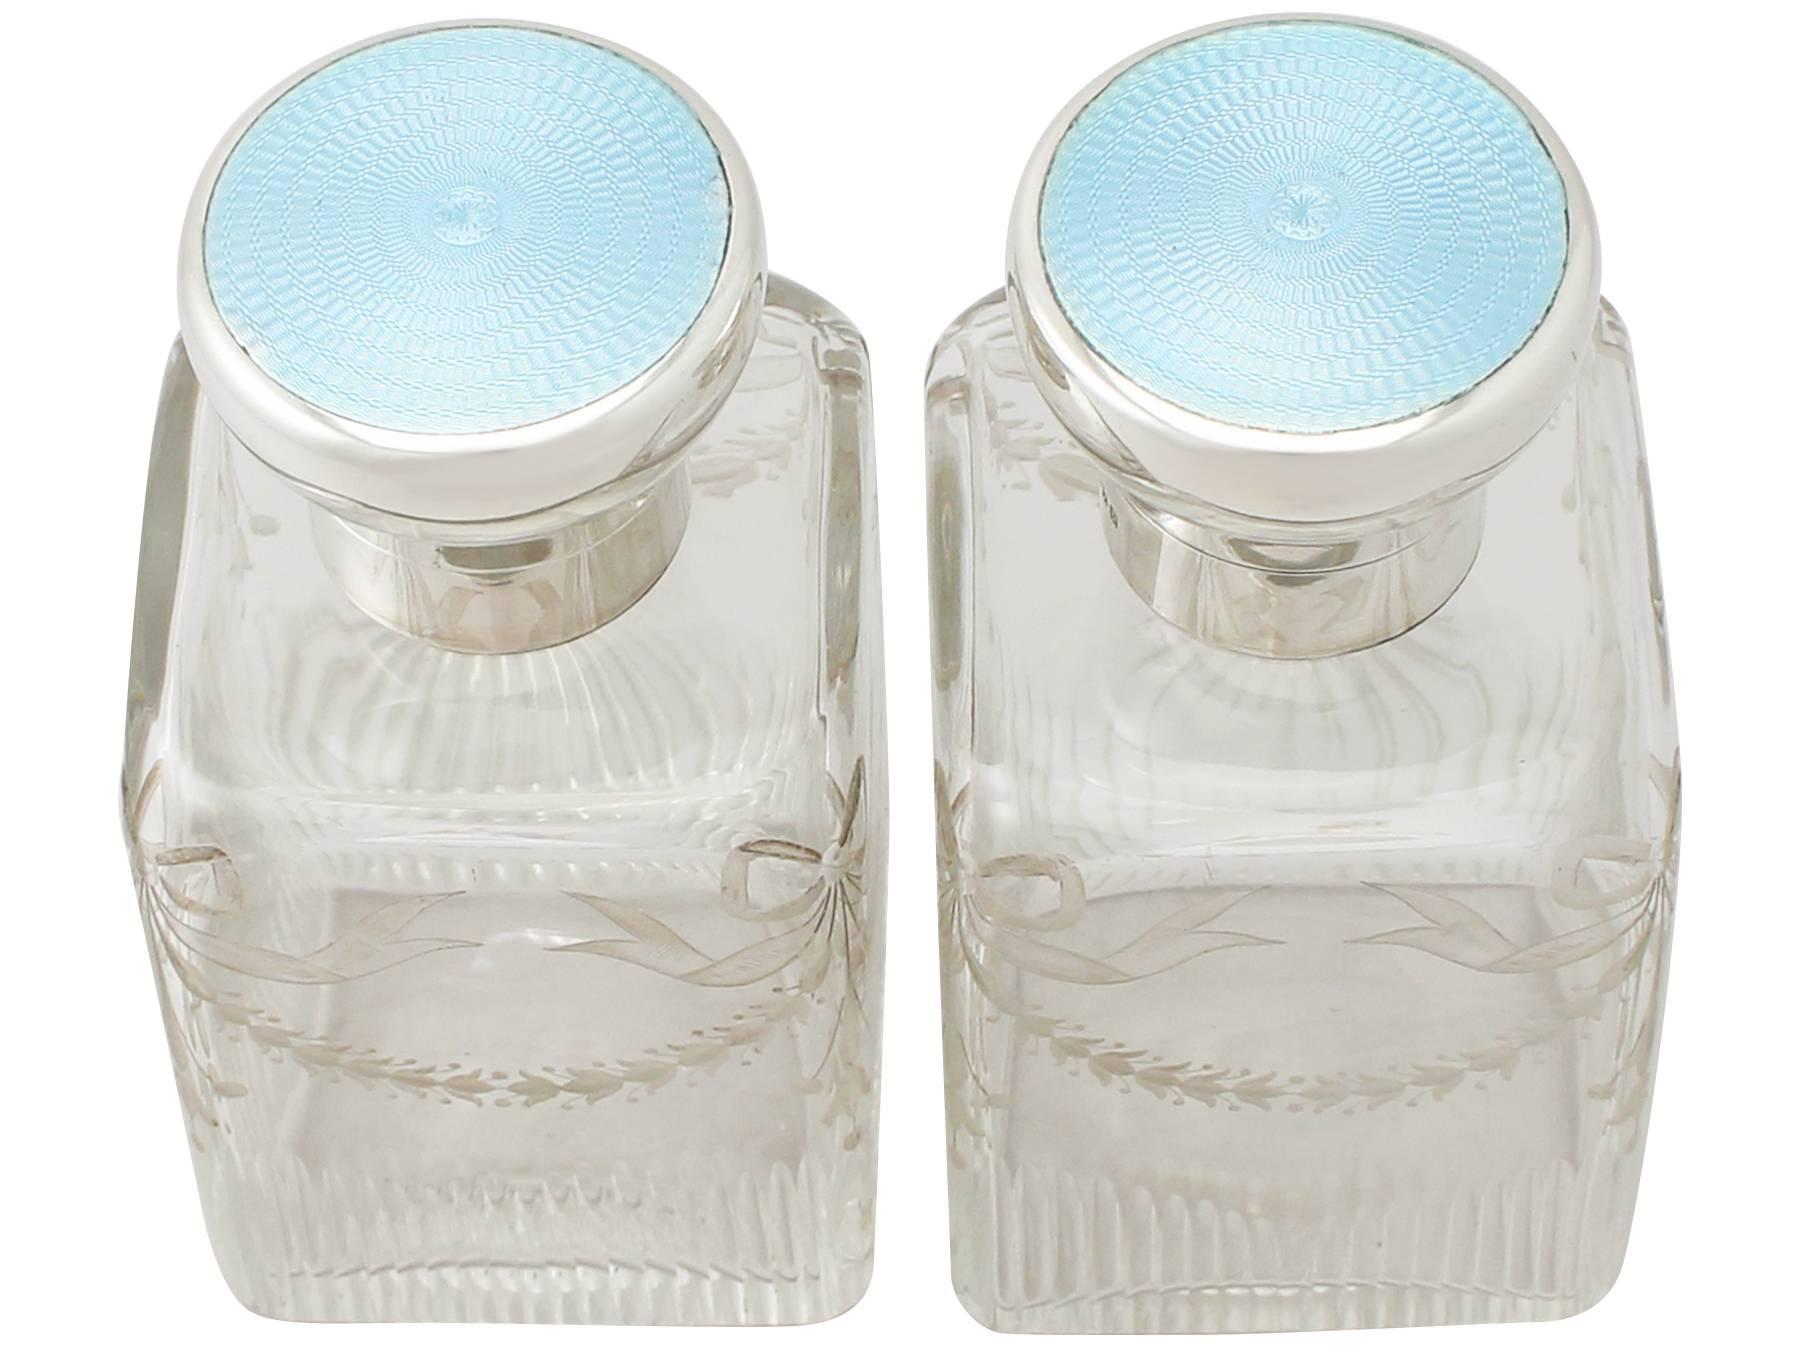 A fine and impressive pair of large antique George V English sterling silver, glass and enamel cologne bottles; an addition to our silver mounted glass collection.

These fine George V cut and etched glass antique cologne bottles have a cuboid form